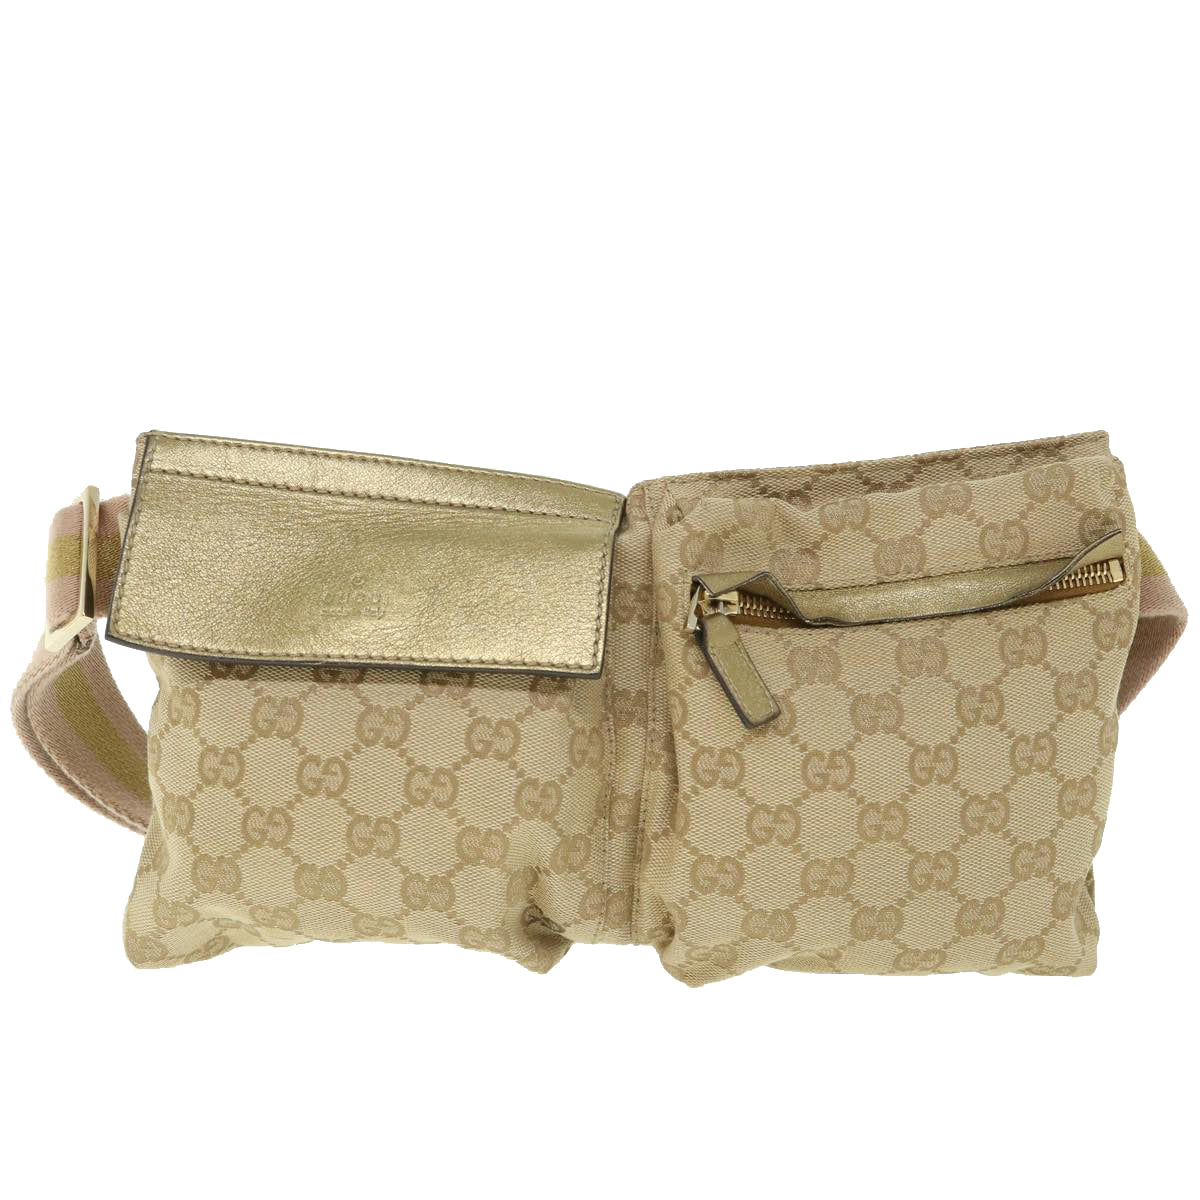 GUCCI GG Canvas Sherry Line Waist bag Beige Pink gold 28566 Auth ep1849 - 0